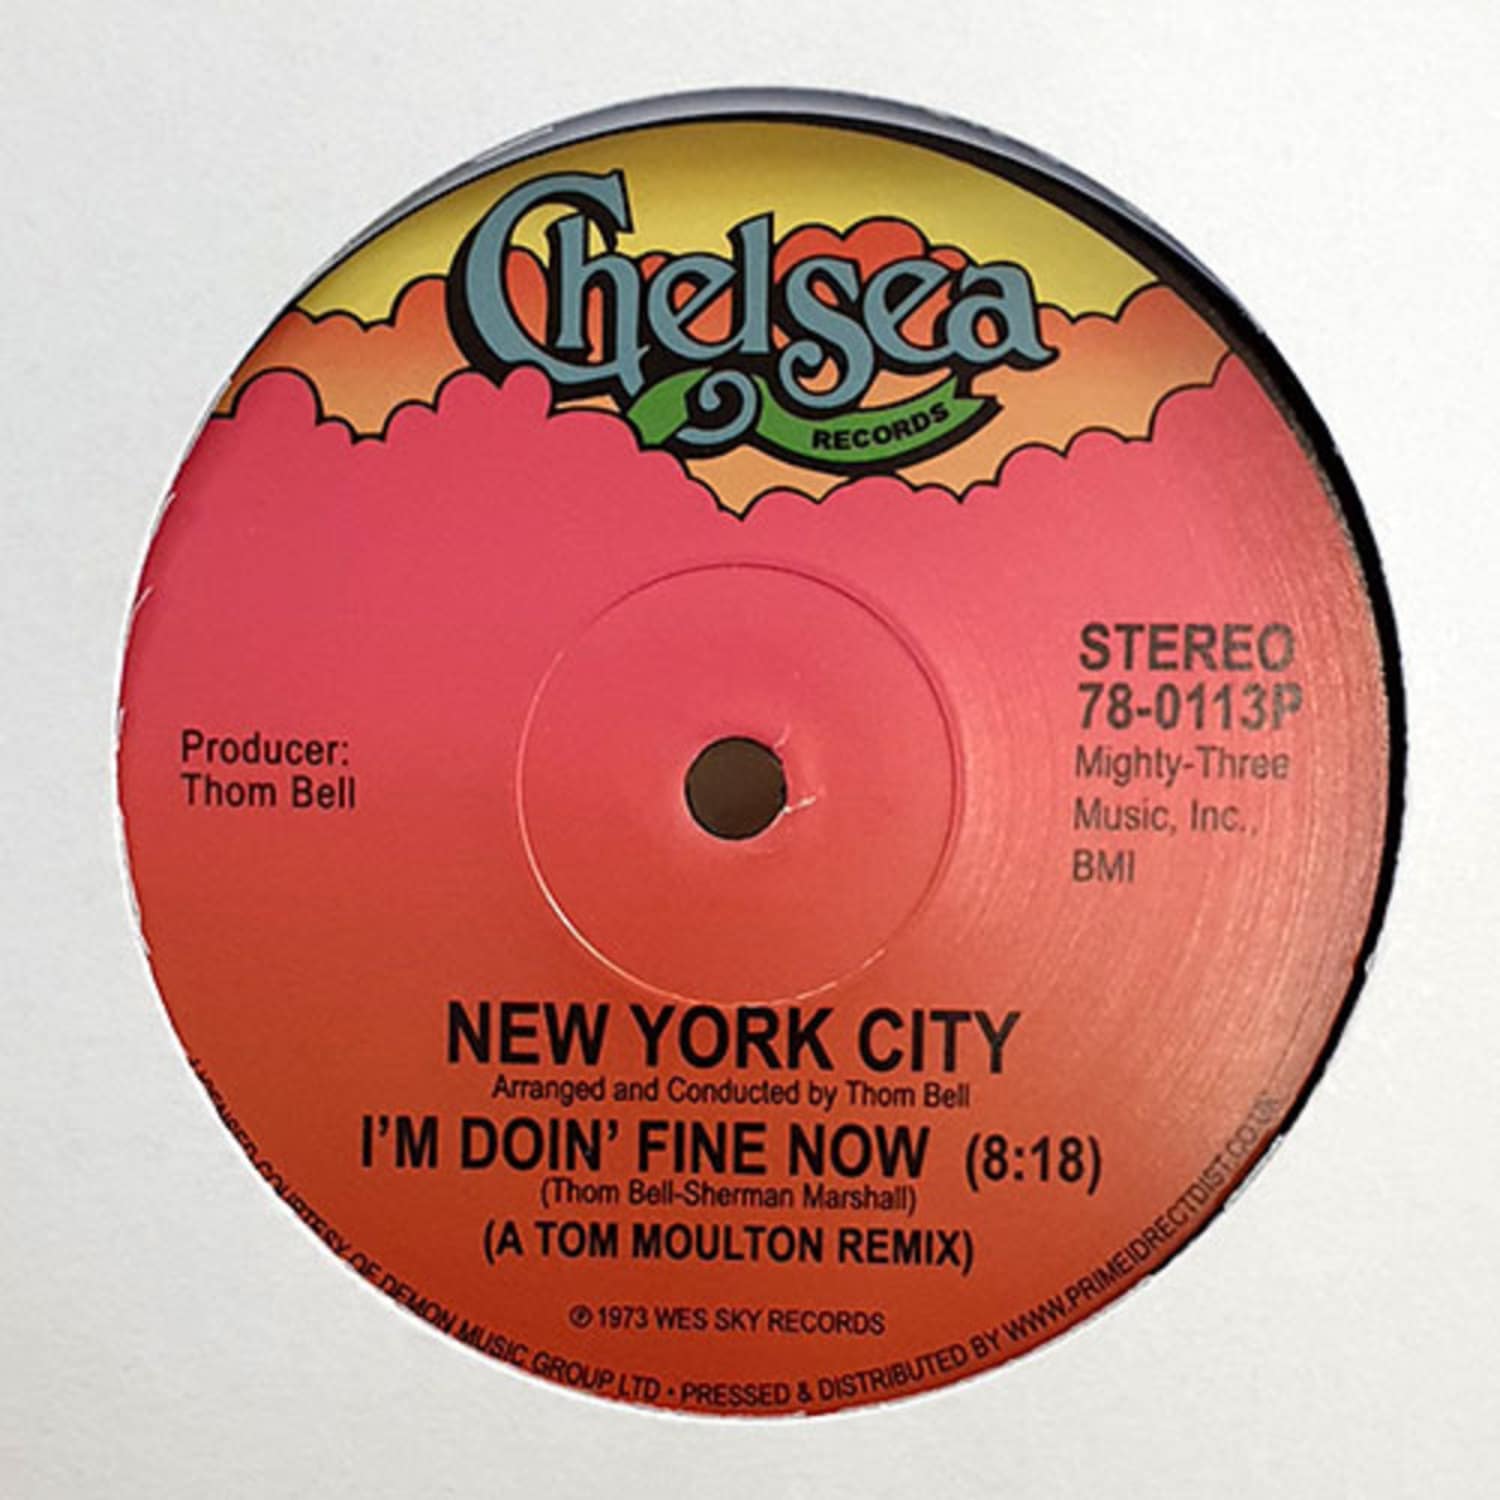 New York City - I M DOIN FINE NOW / QUICK FAST IN A HURRY 